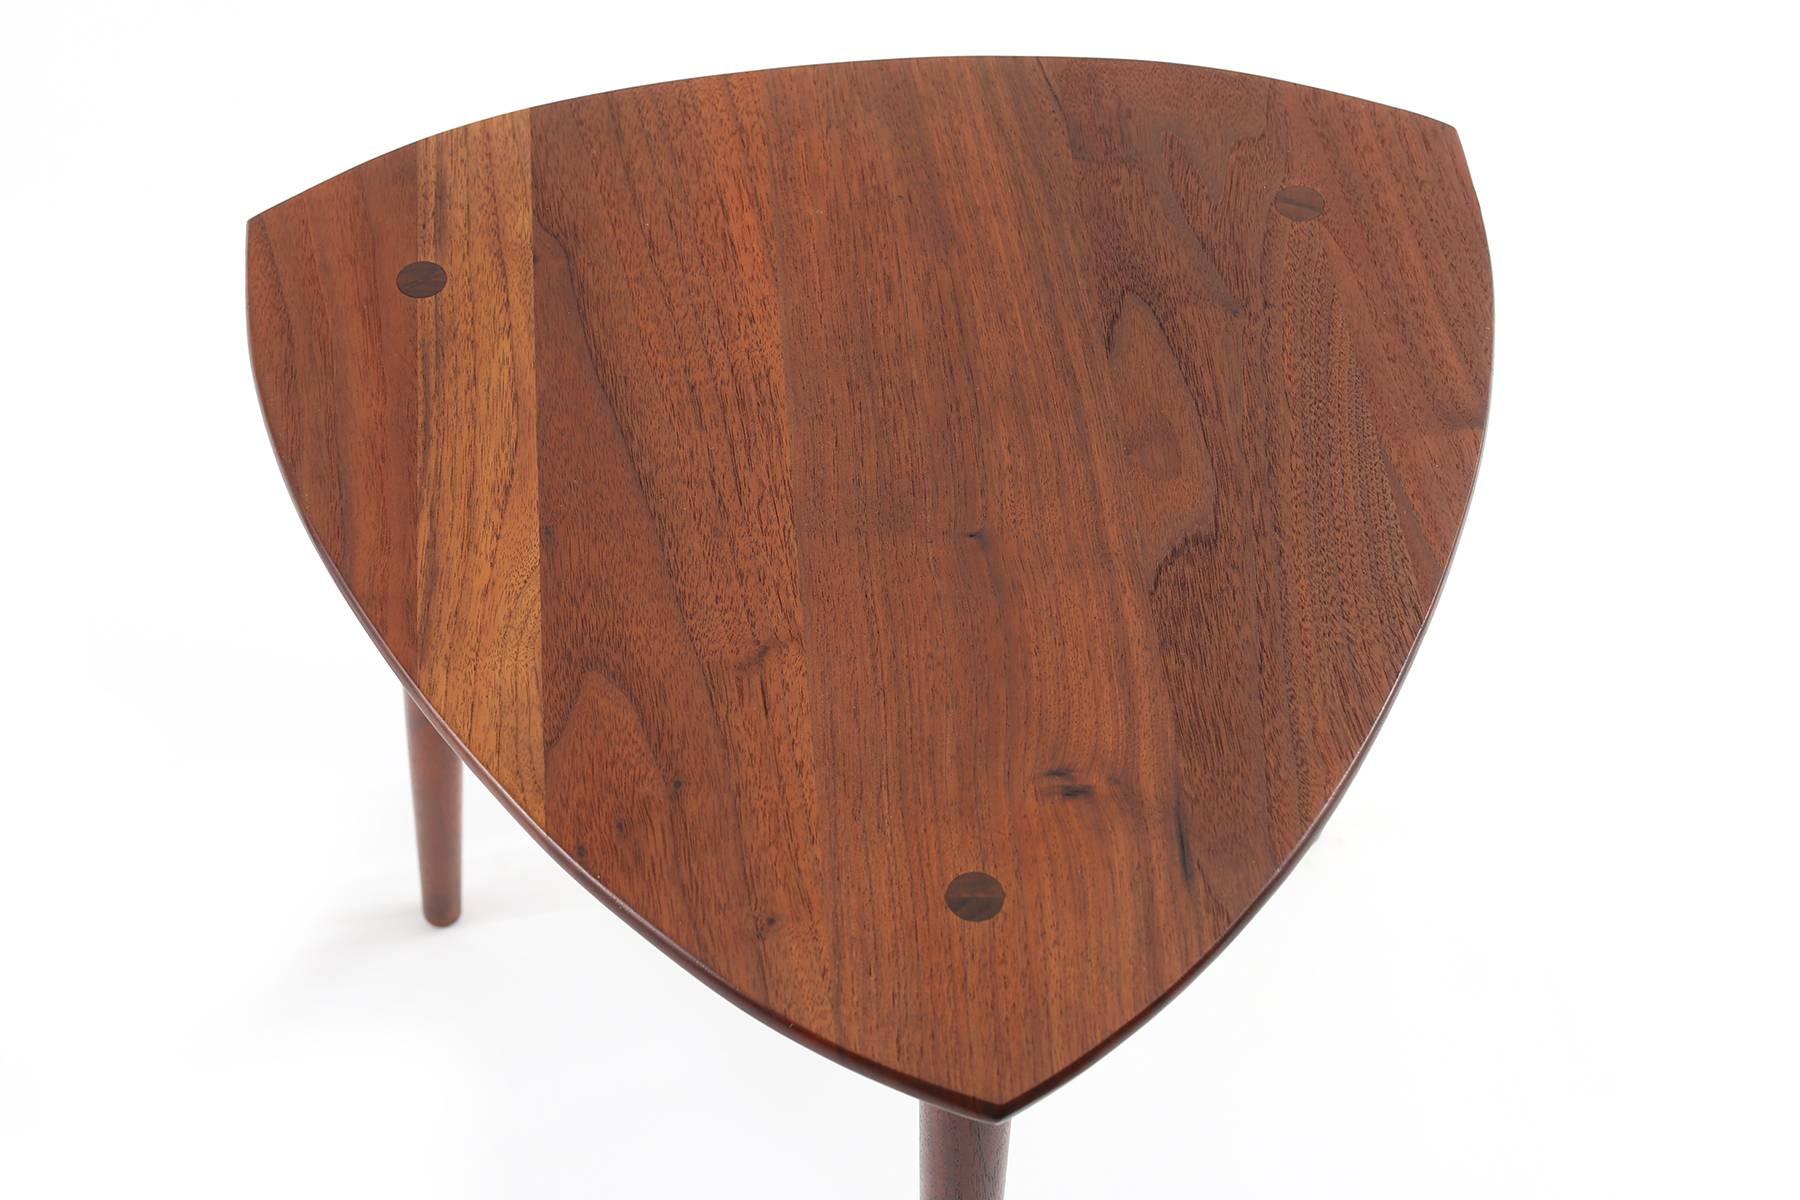 Pair of Kipp Stewart for Winchendon solid walnut side tables, circa early 1960s. These sculptural examples have beautifully grained triangular tops with tapered legs and stretchers. Price listed is for the pair.